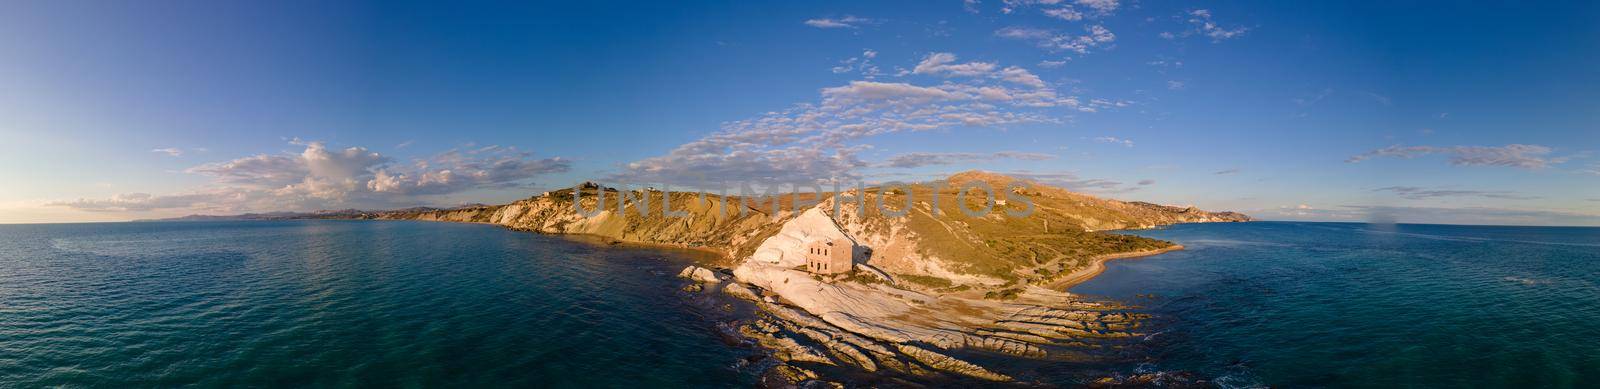 Punta Bianca, Agrigento in Sicily Italy White beach with old ruins of an abandoned stone house on white cliffs Sicilia Italy. 